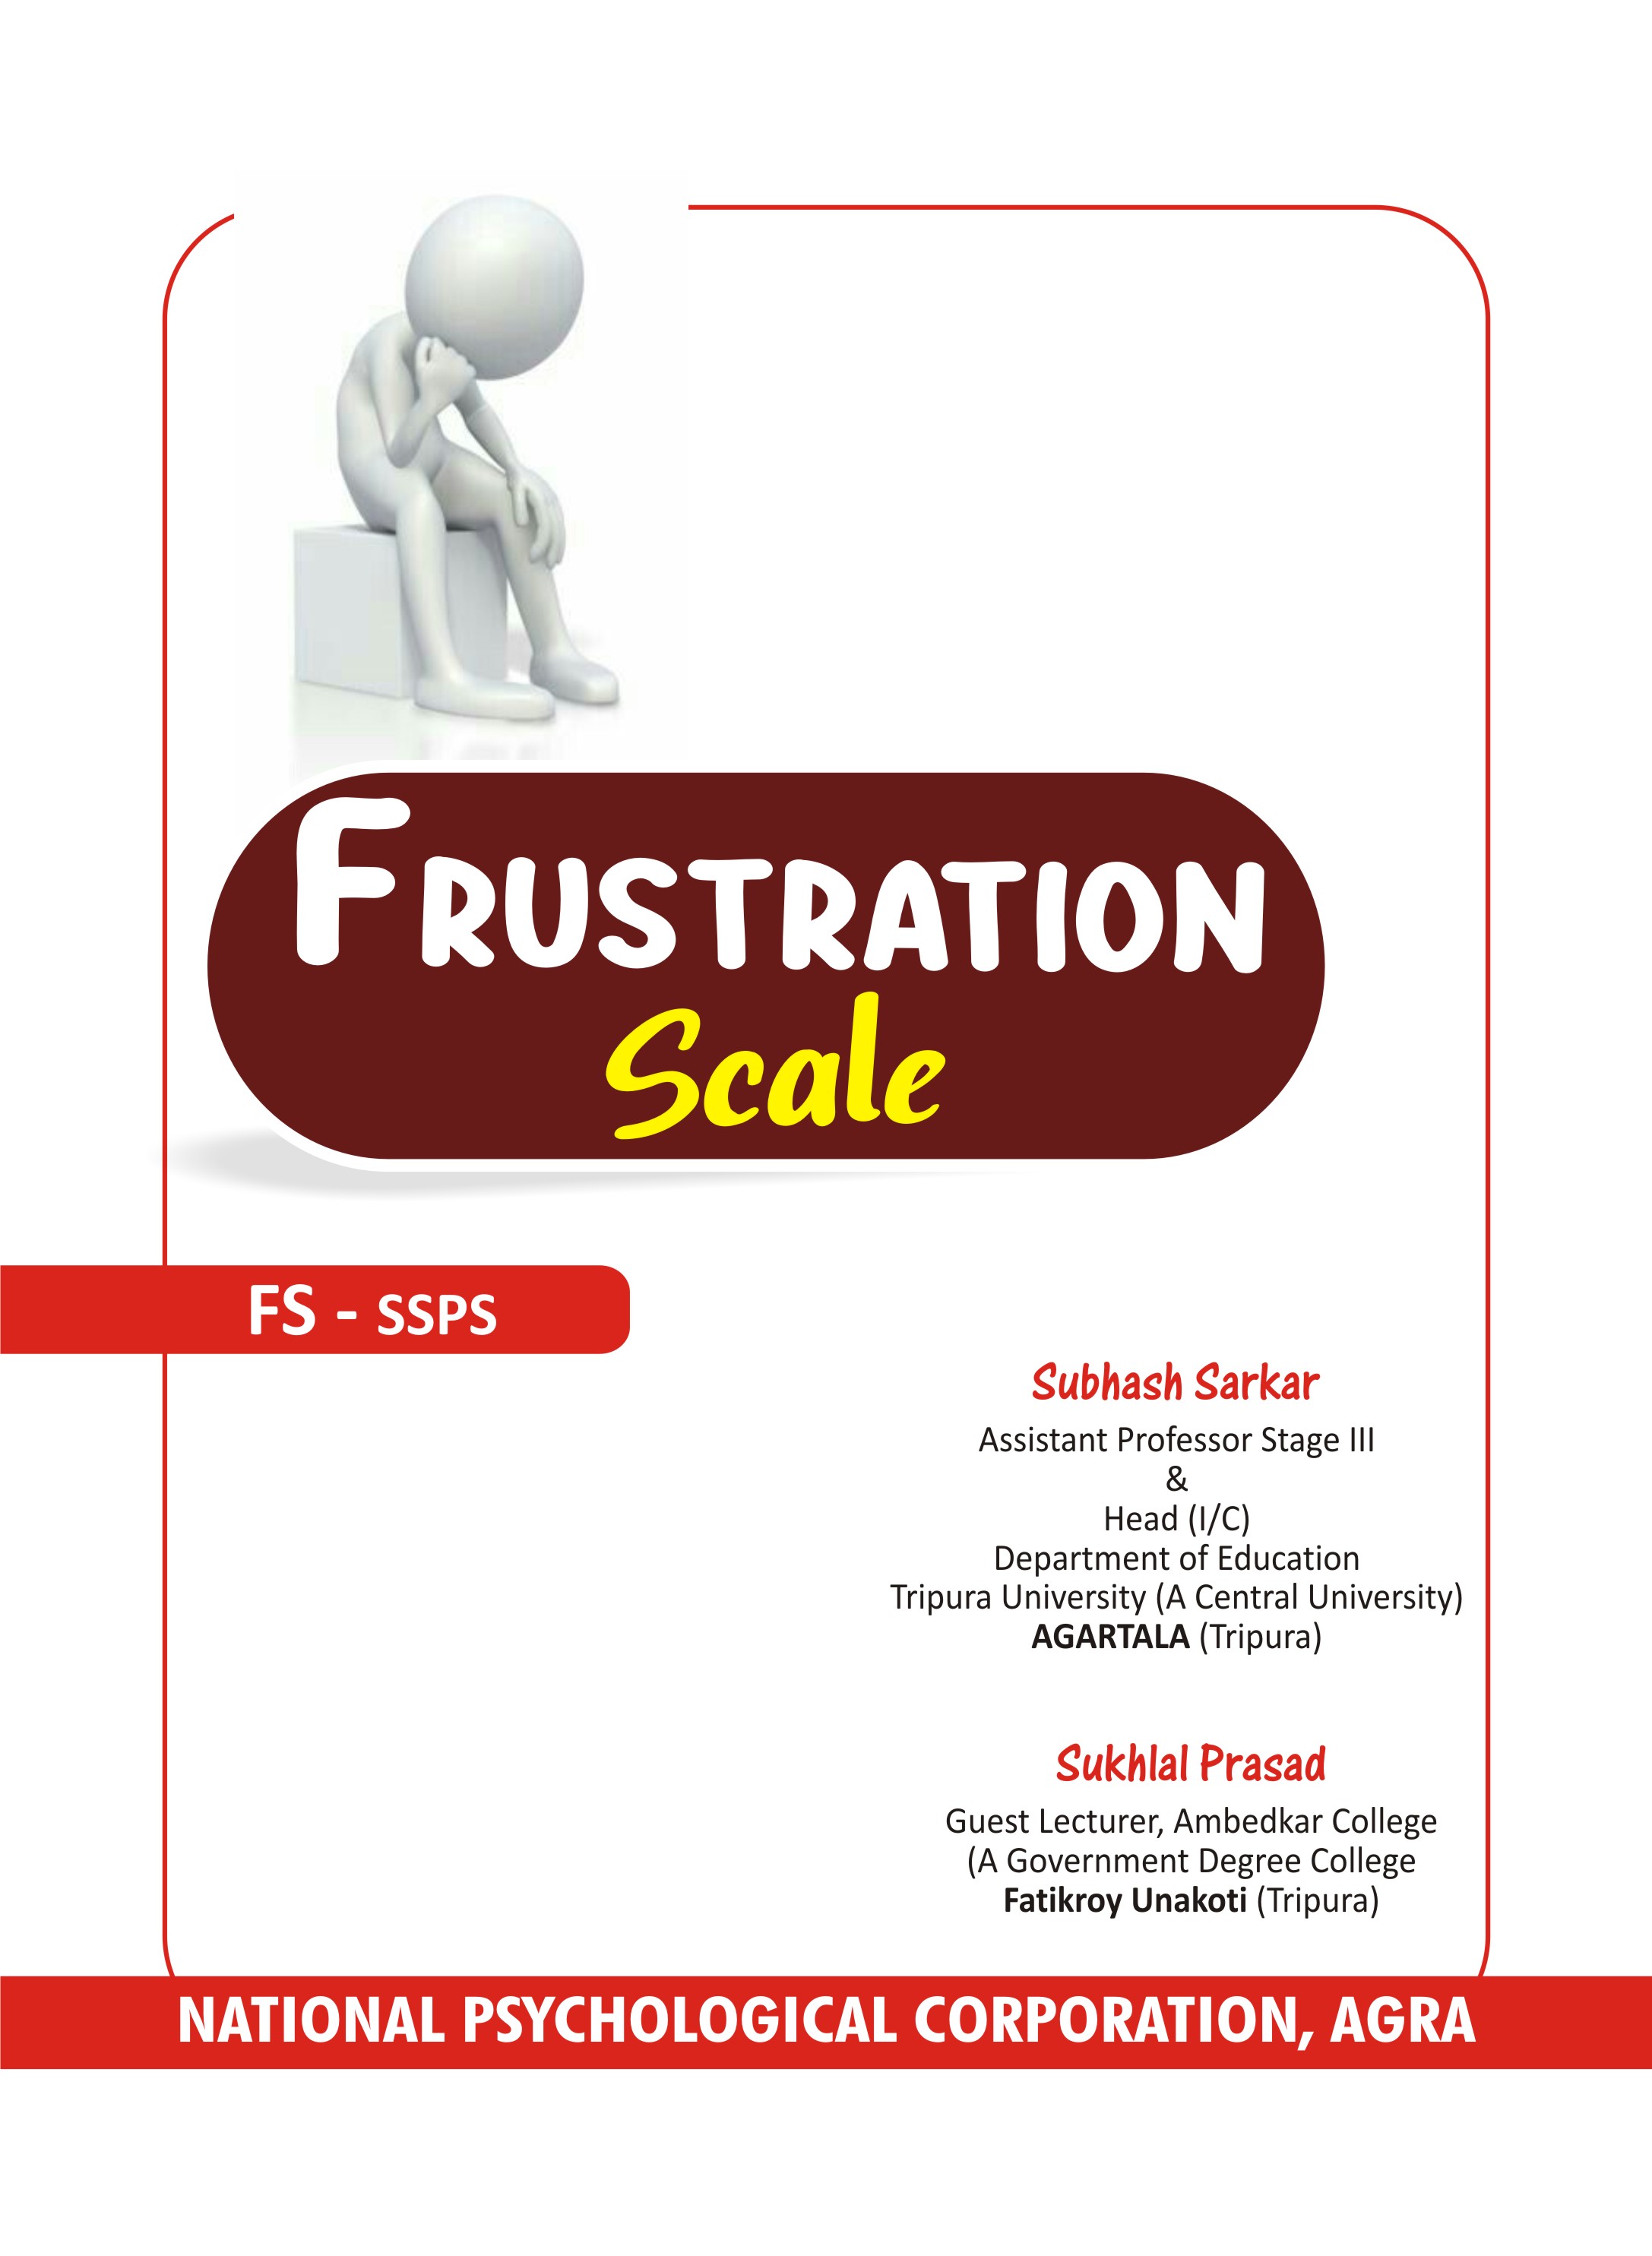 FRUSTRATION-SCALE